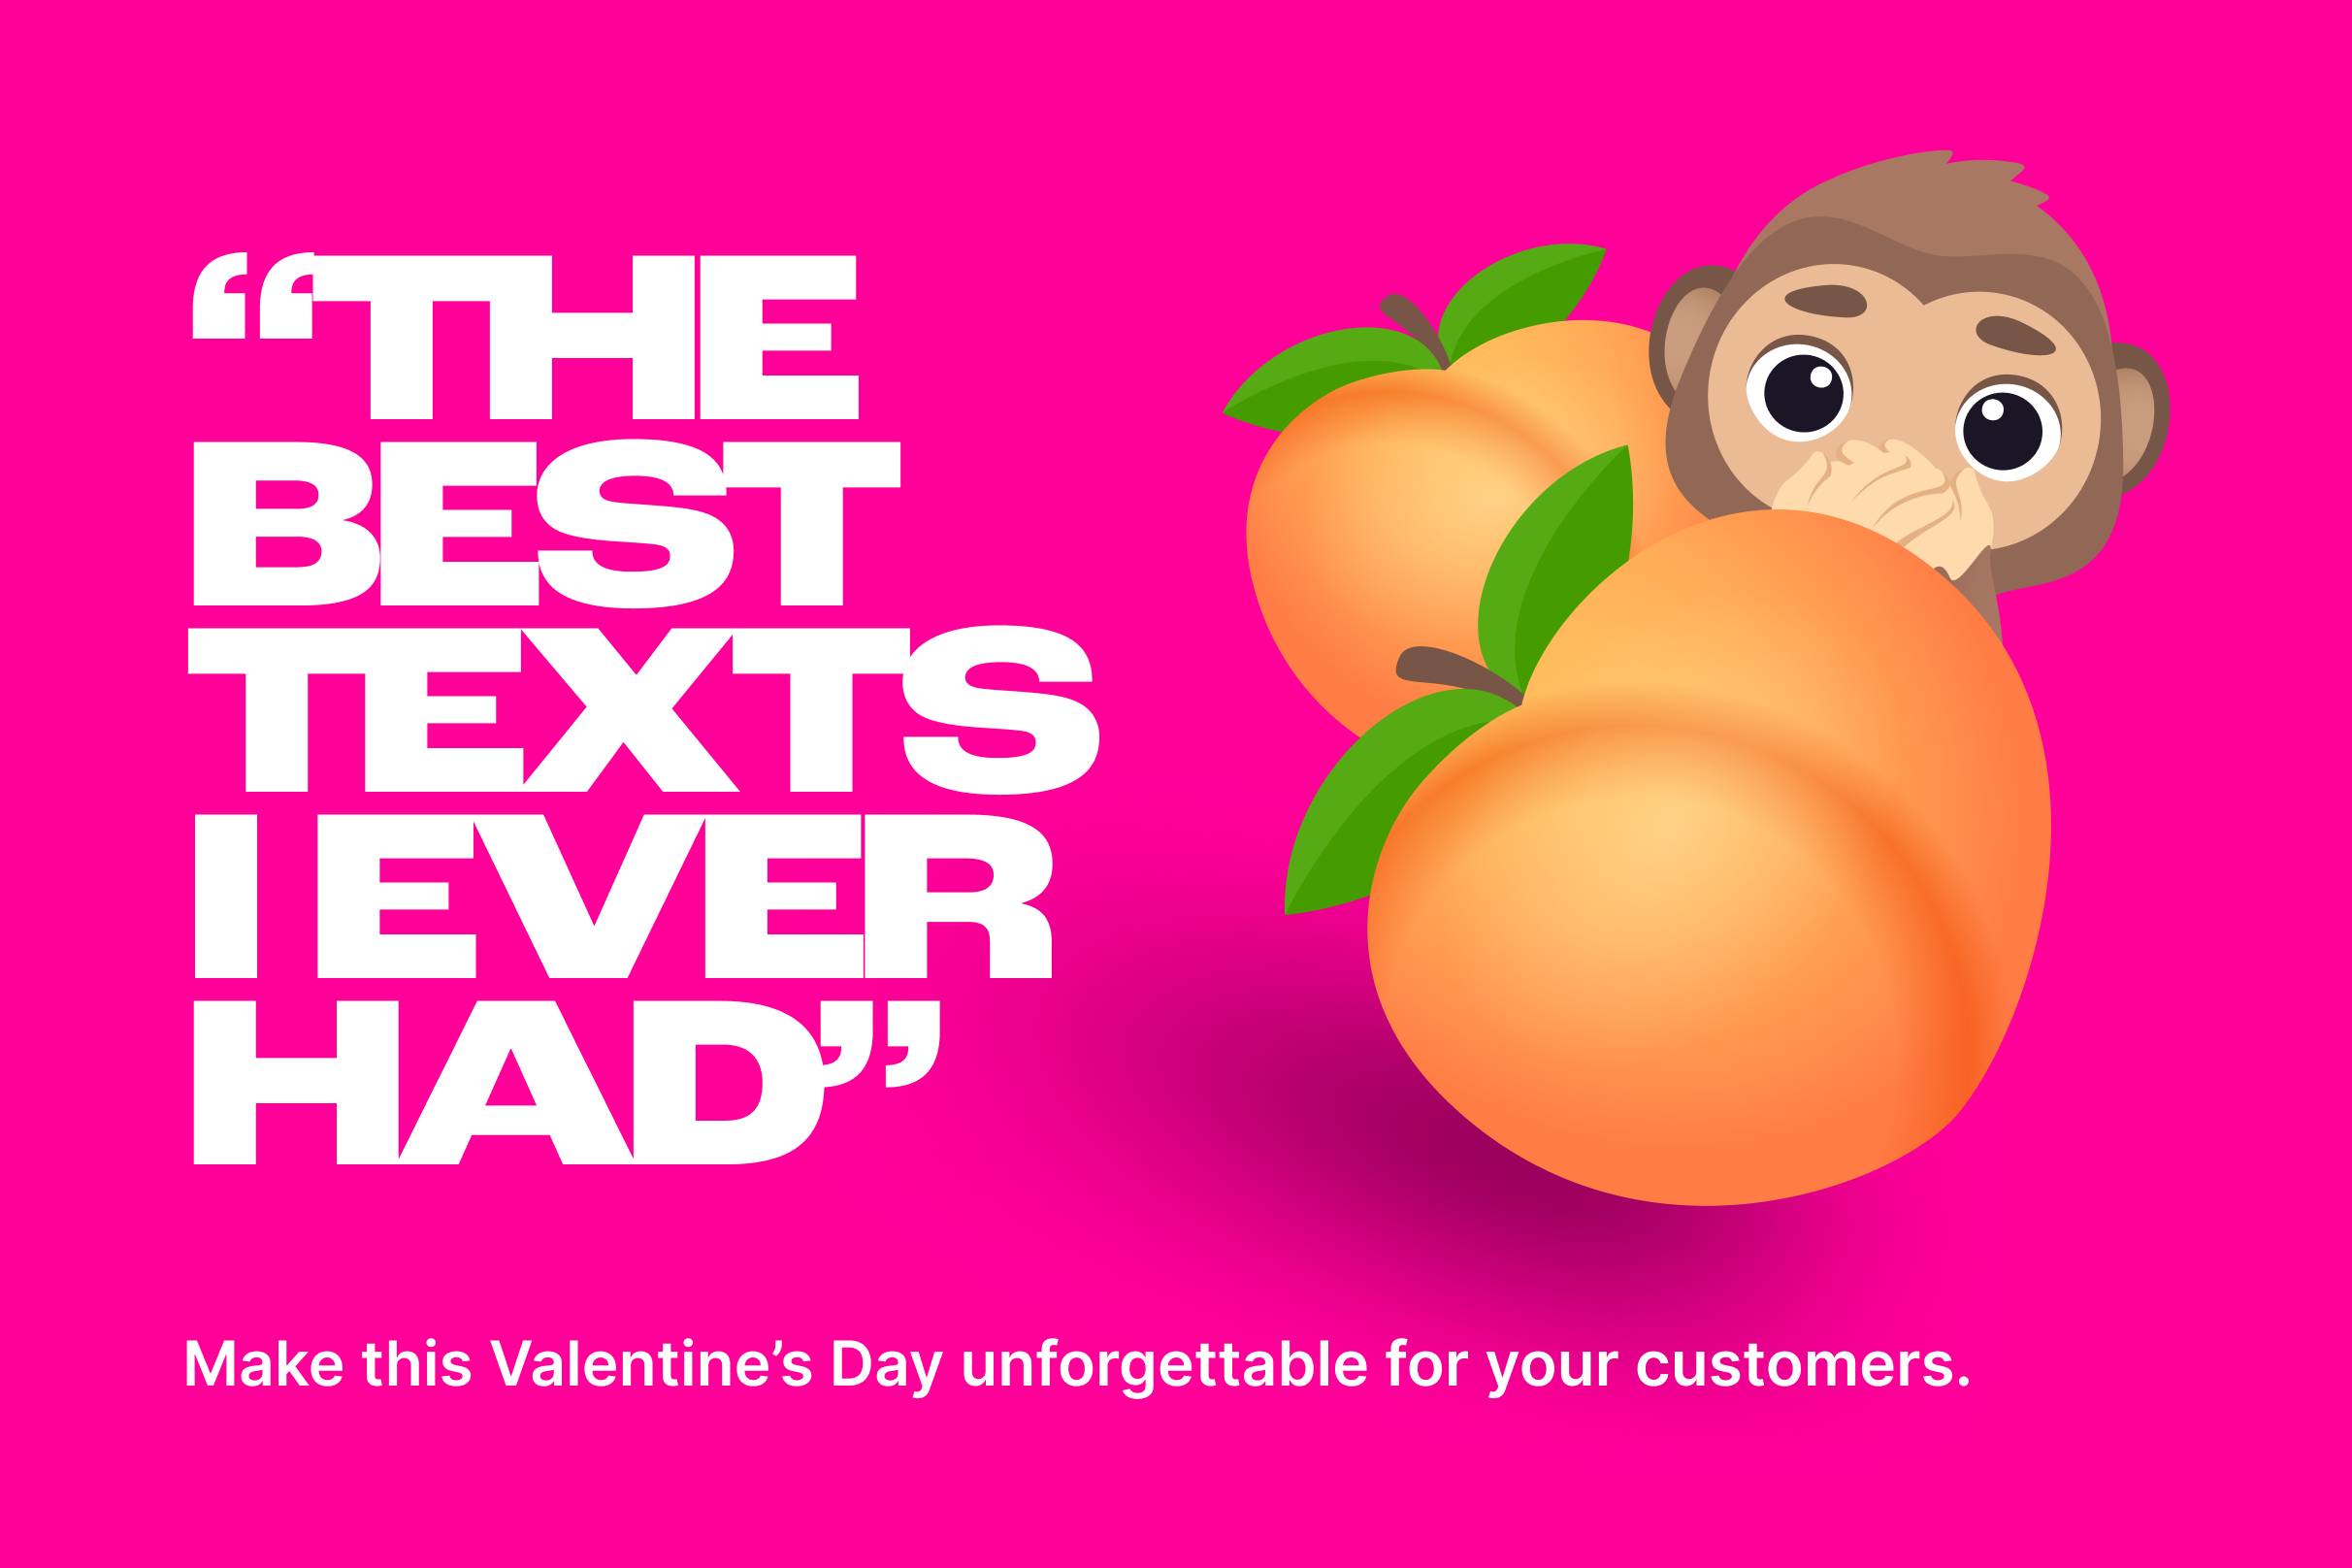 The Best Texts We've Ever Had: Creative Valentine's Day SMS Marketing Examples